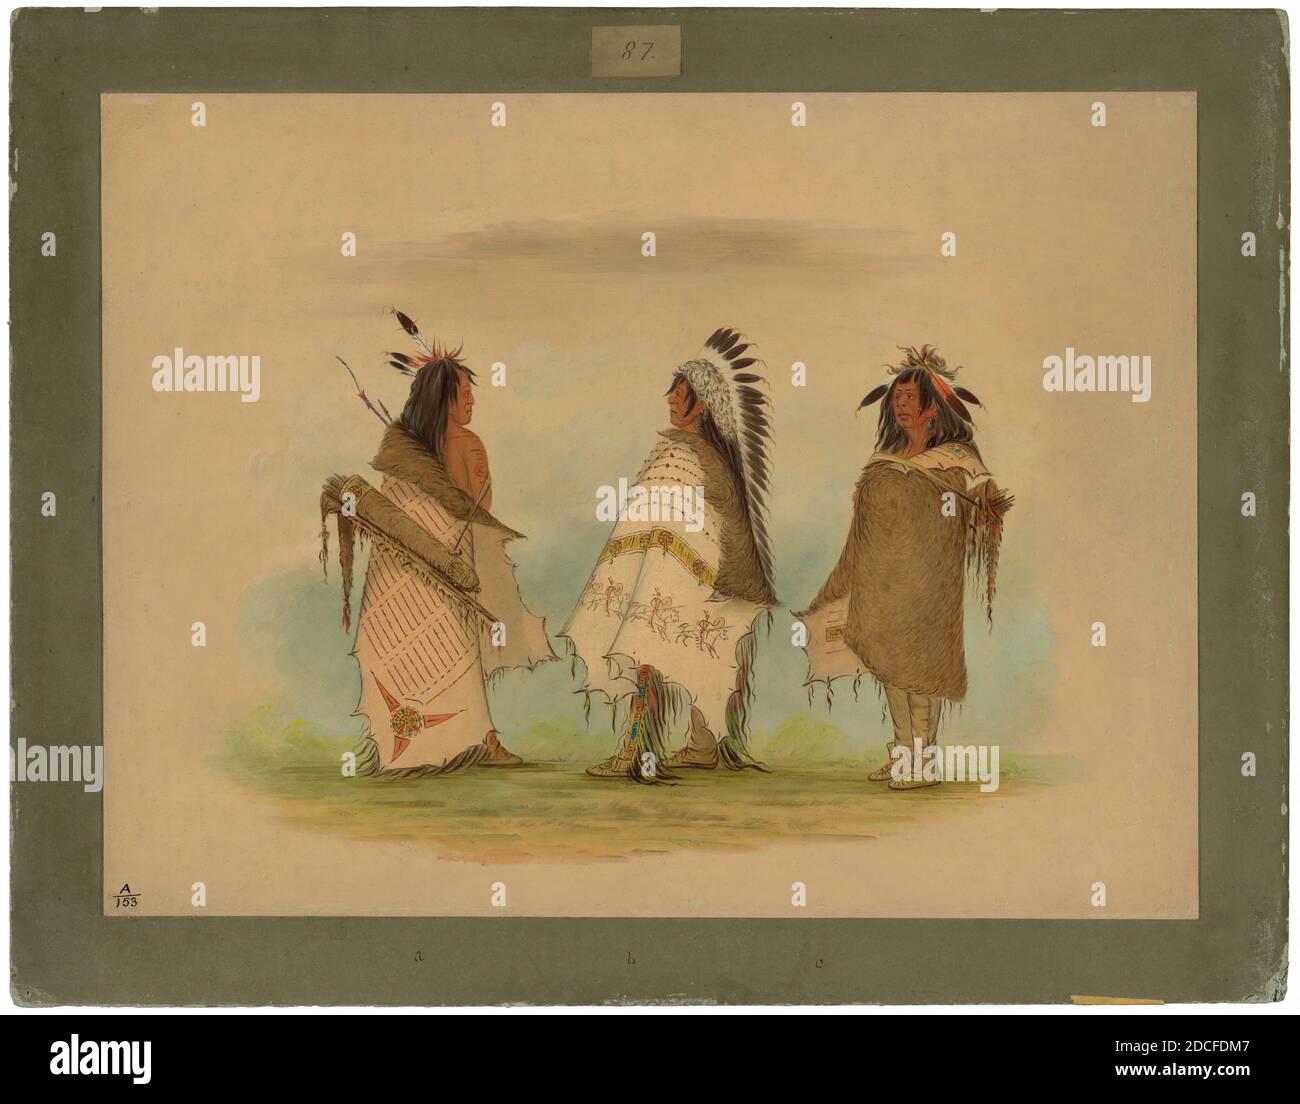 George Catlin, (artist), American, 1796 - 1872, Three Shoshonee Warriors, 1861, oil on card mounted on paperboard, overall: 45.6 x 60.4 cm (17 15/16 x 23 3/4 in Stock Photo